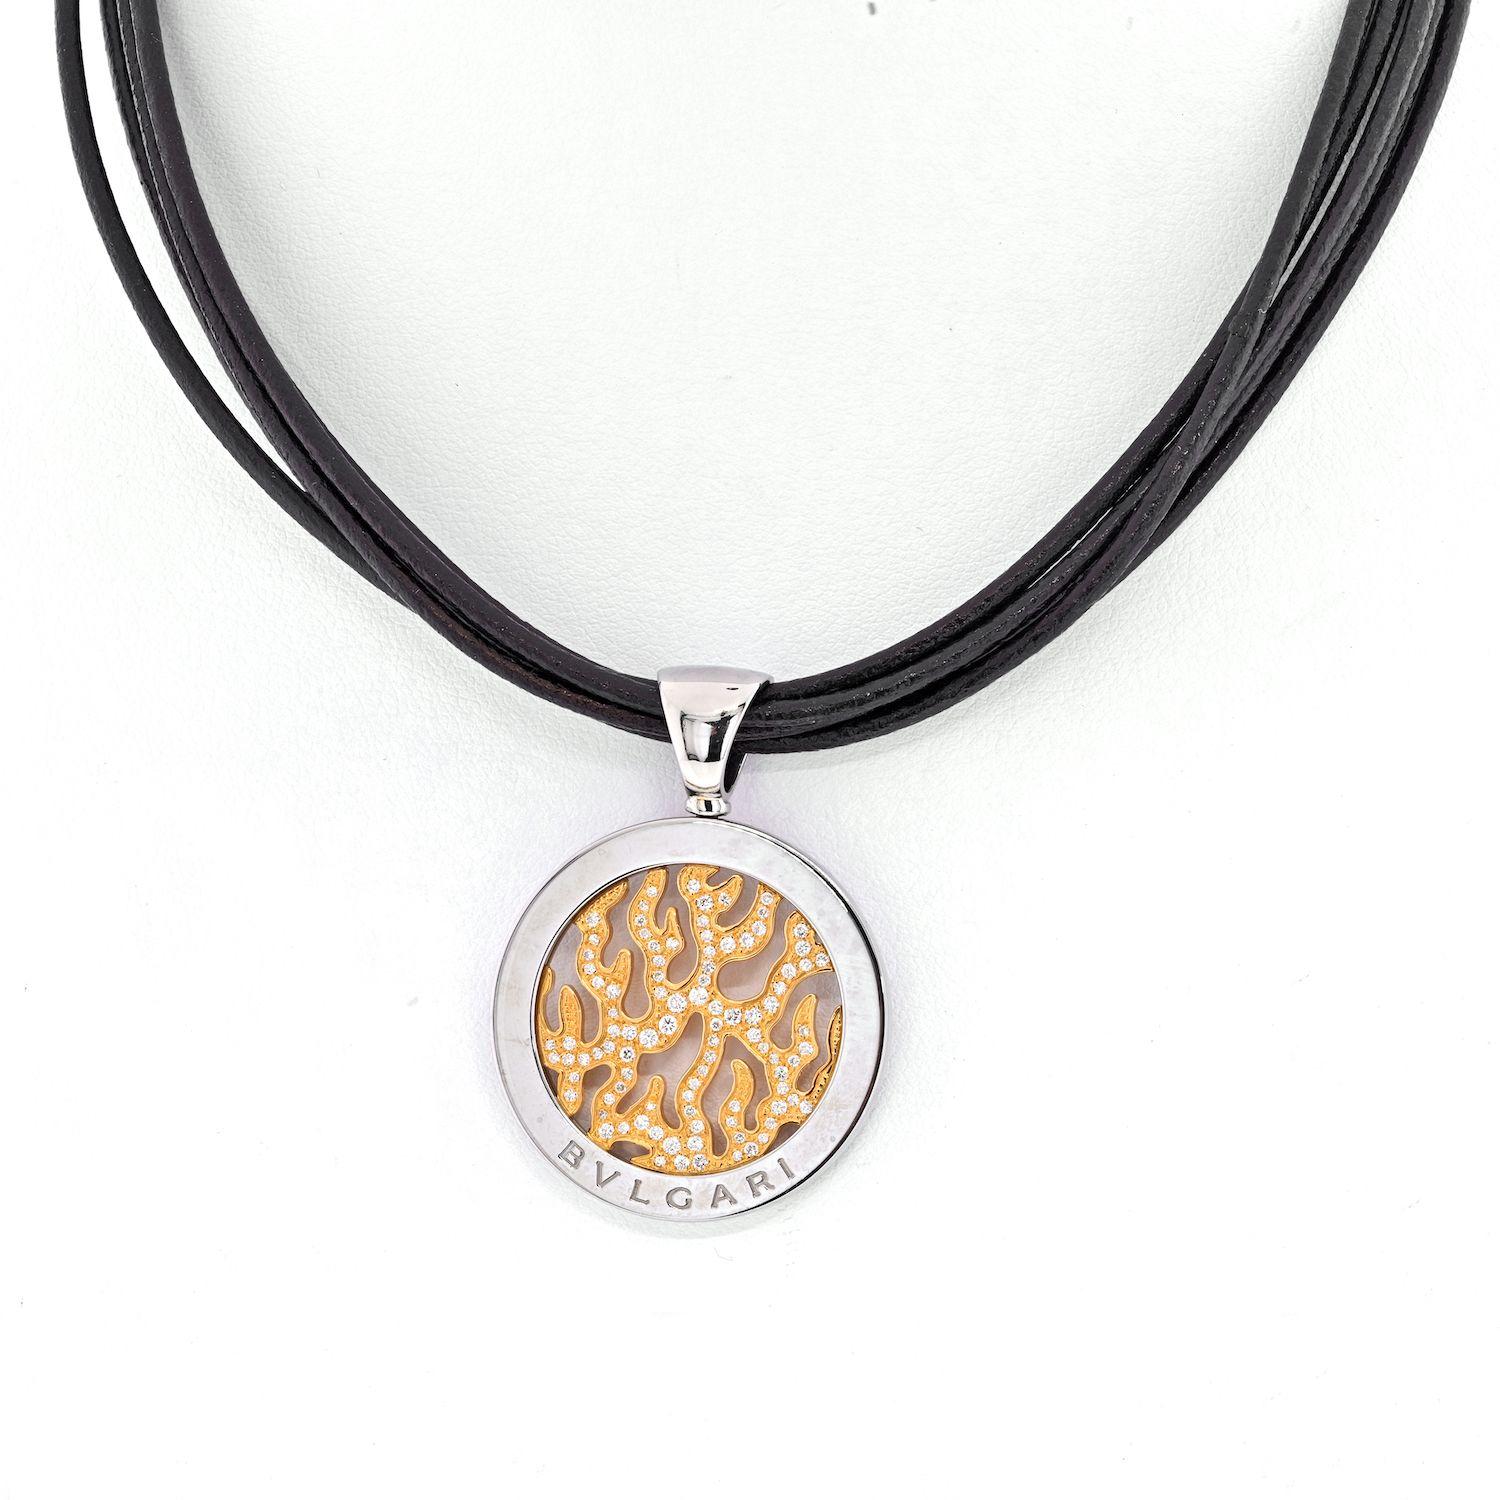 Bvlgari Diamond Tondo Fire Flame On A Black Cord Necklace. 18K Yellow gold, stainless steel. 
Cord: 16 inches. 
Pendant: diamonds 0.65cts. approx. 
Medallion width: 1 inch